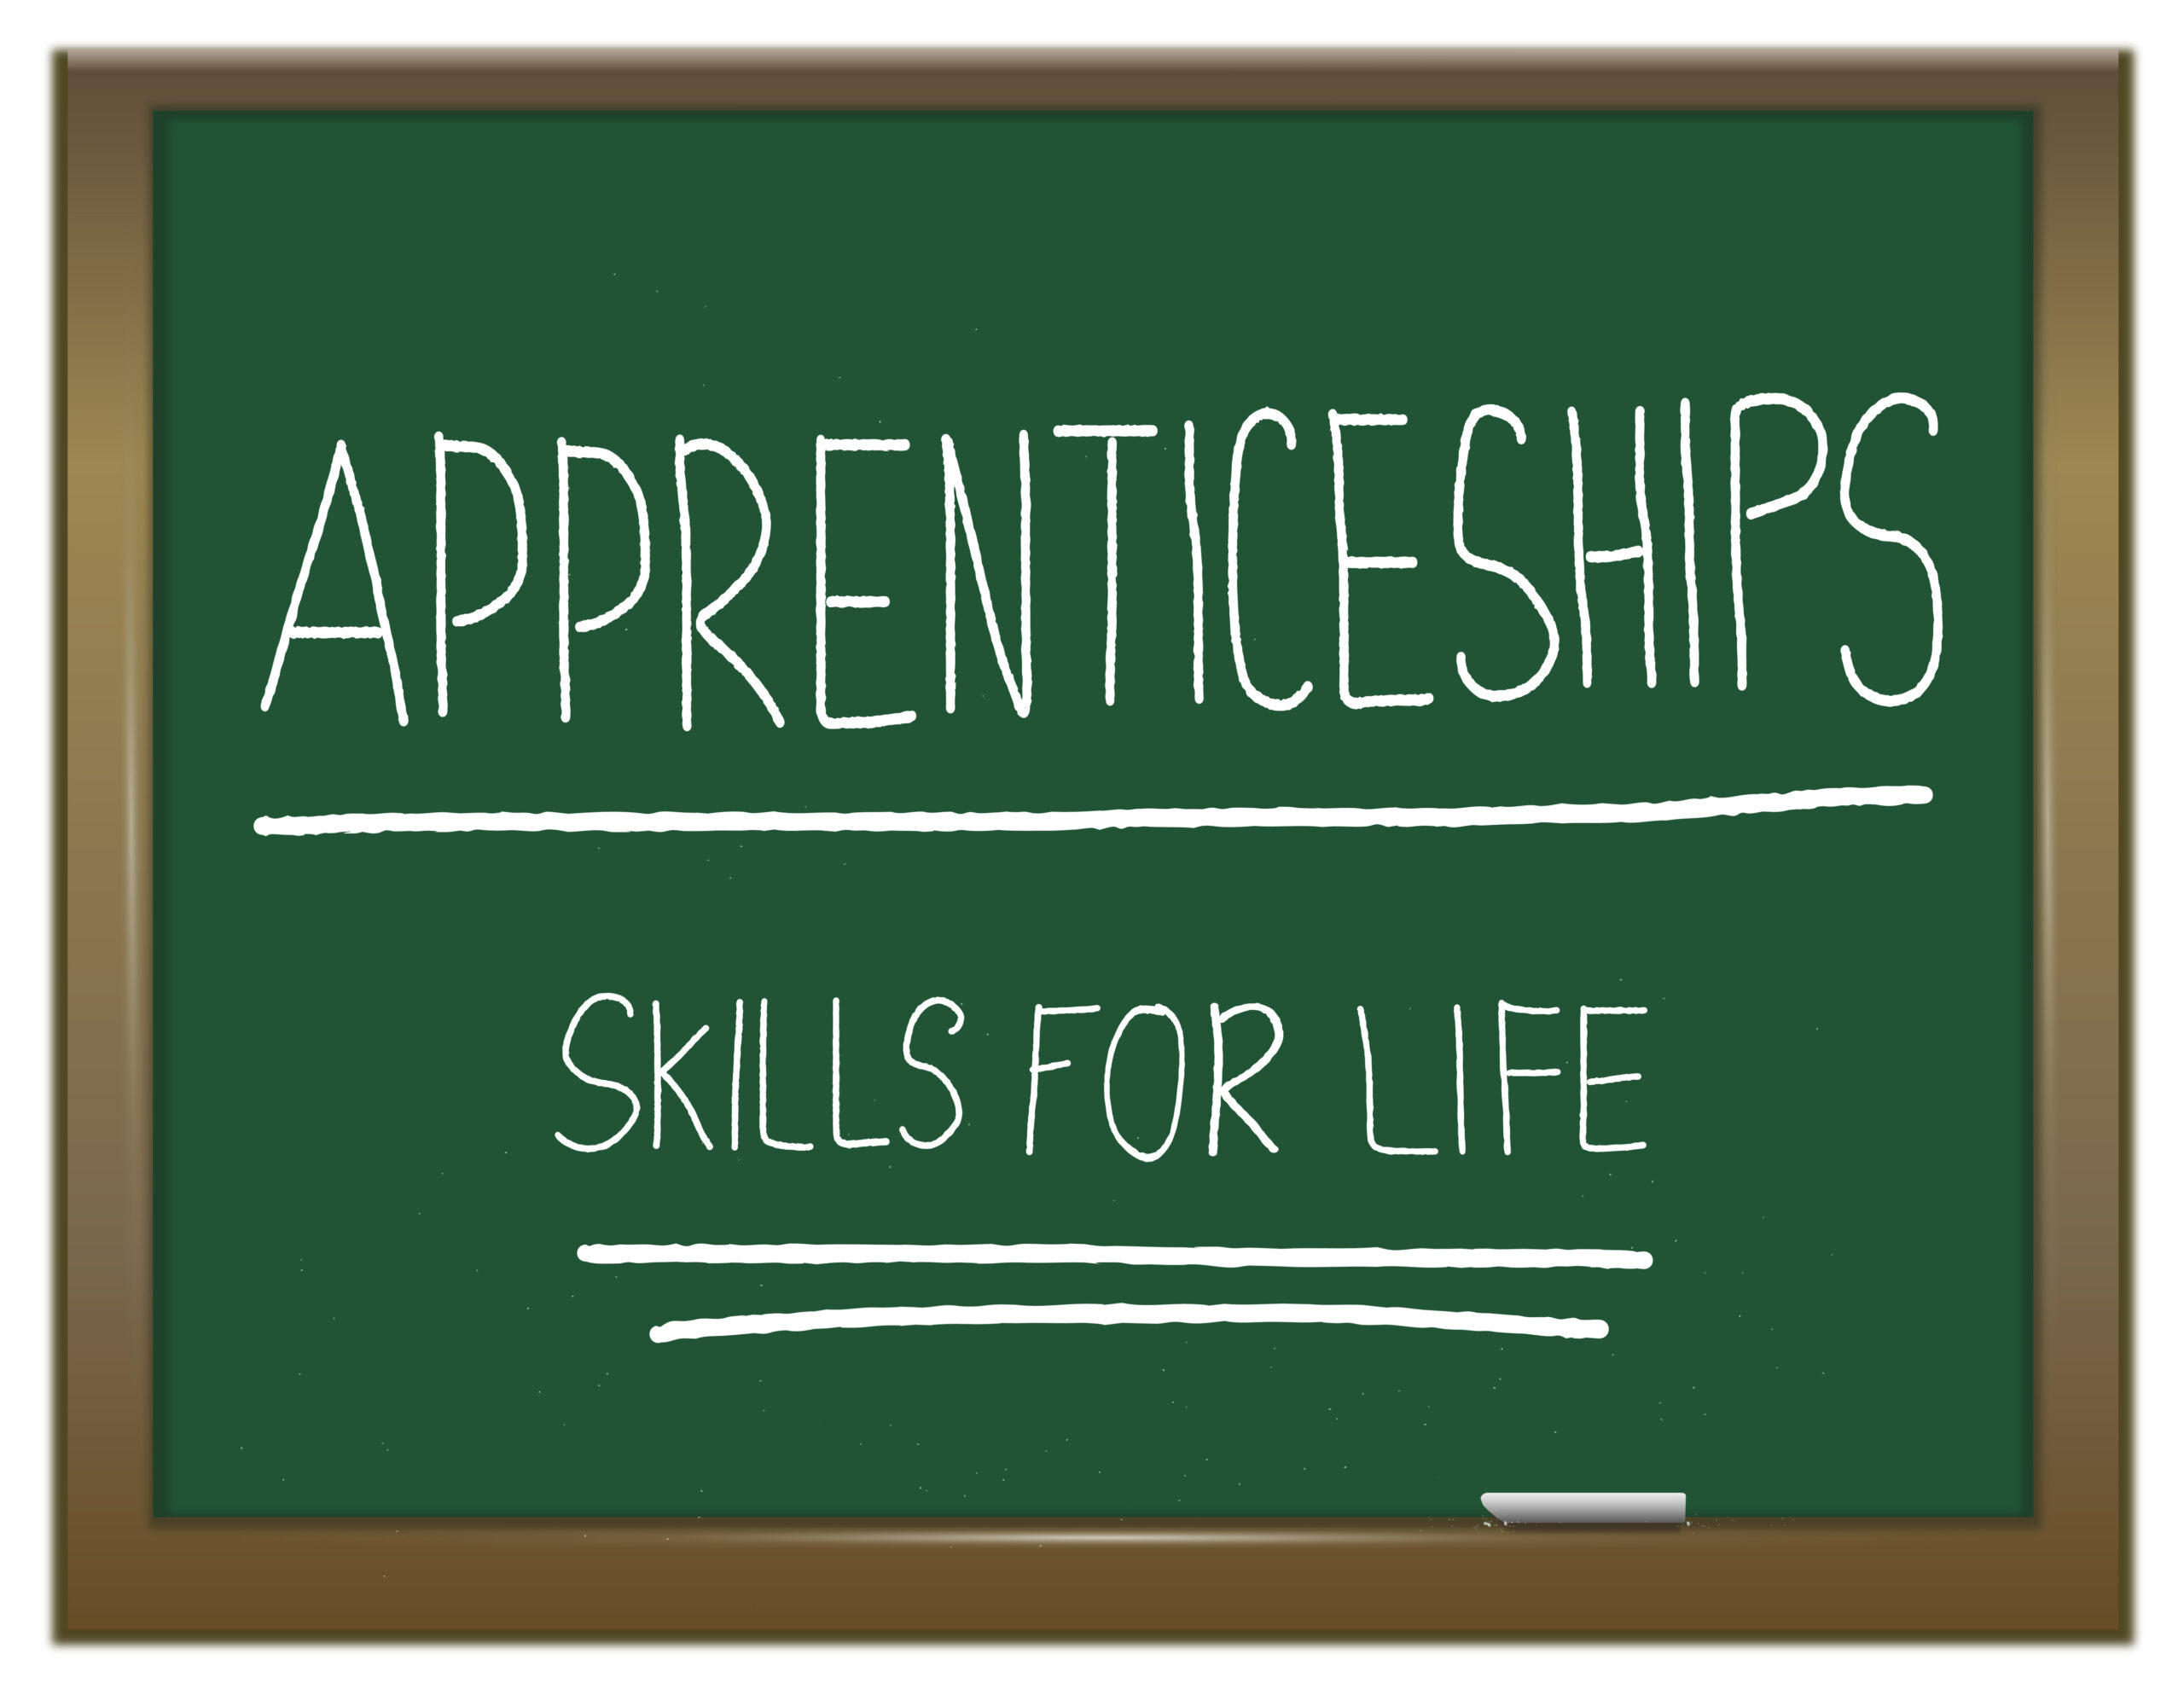 DOL releases guidance on “industry-recognized” apprenticeship programs